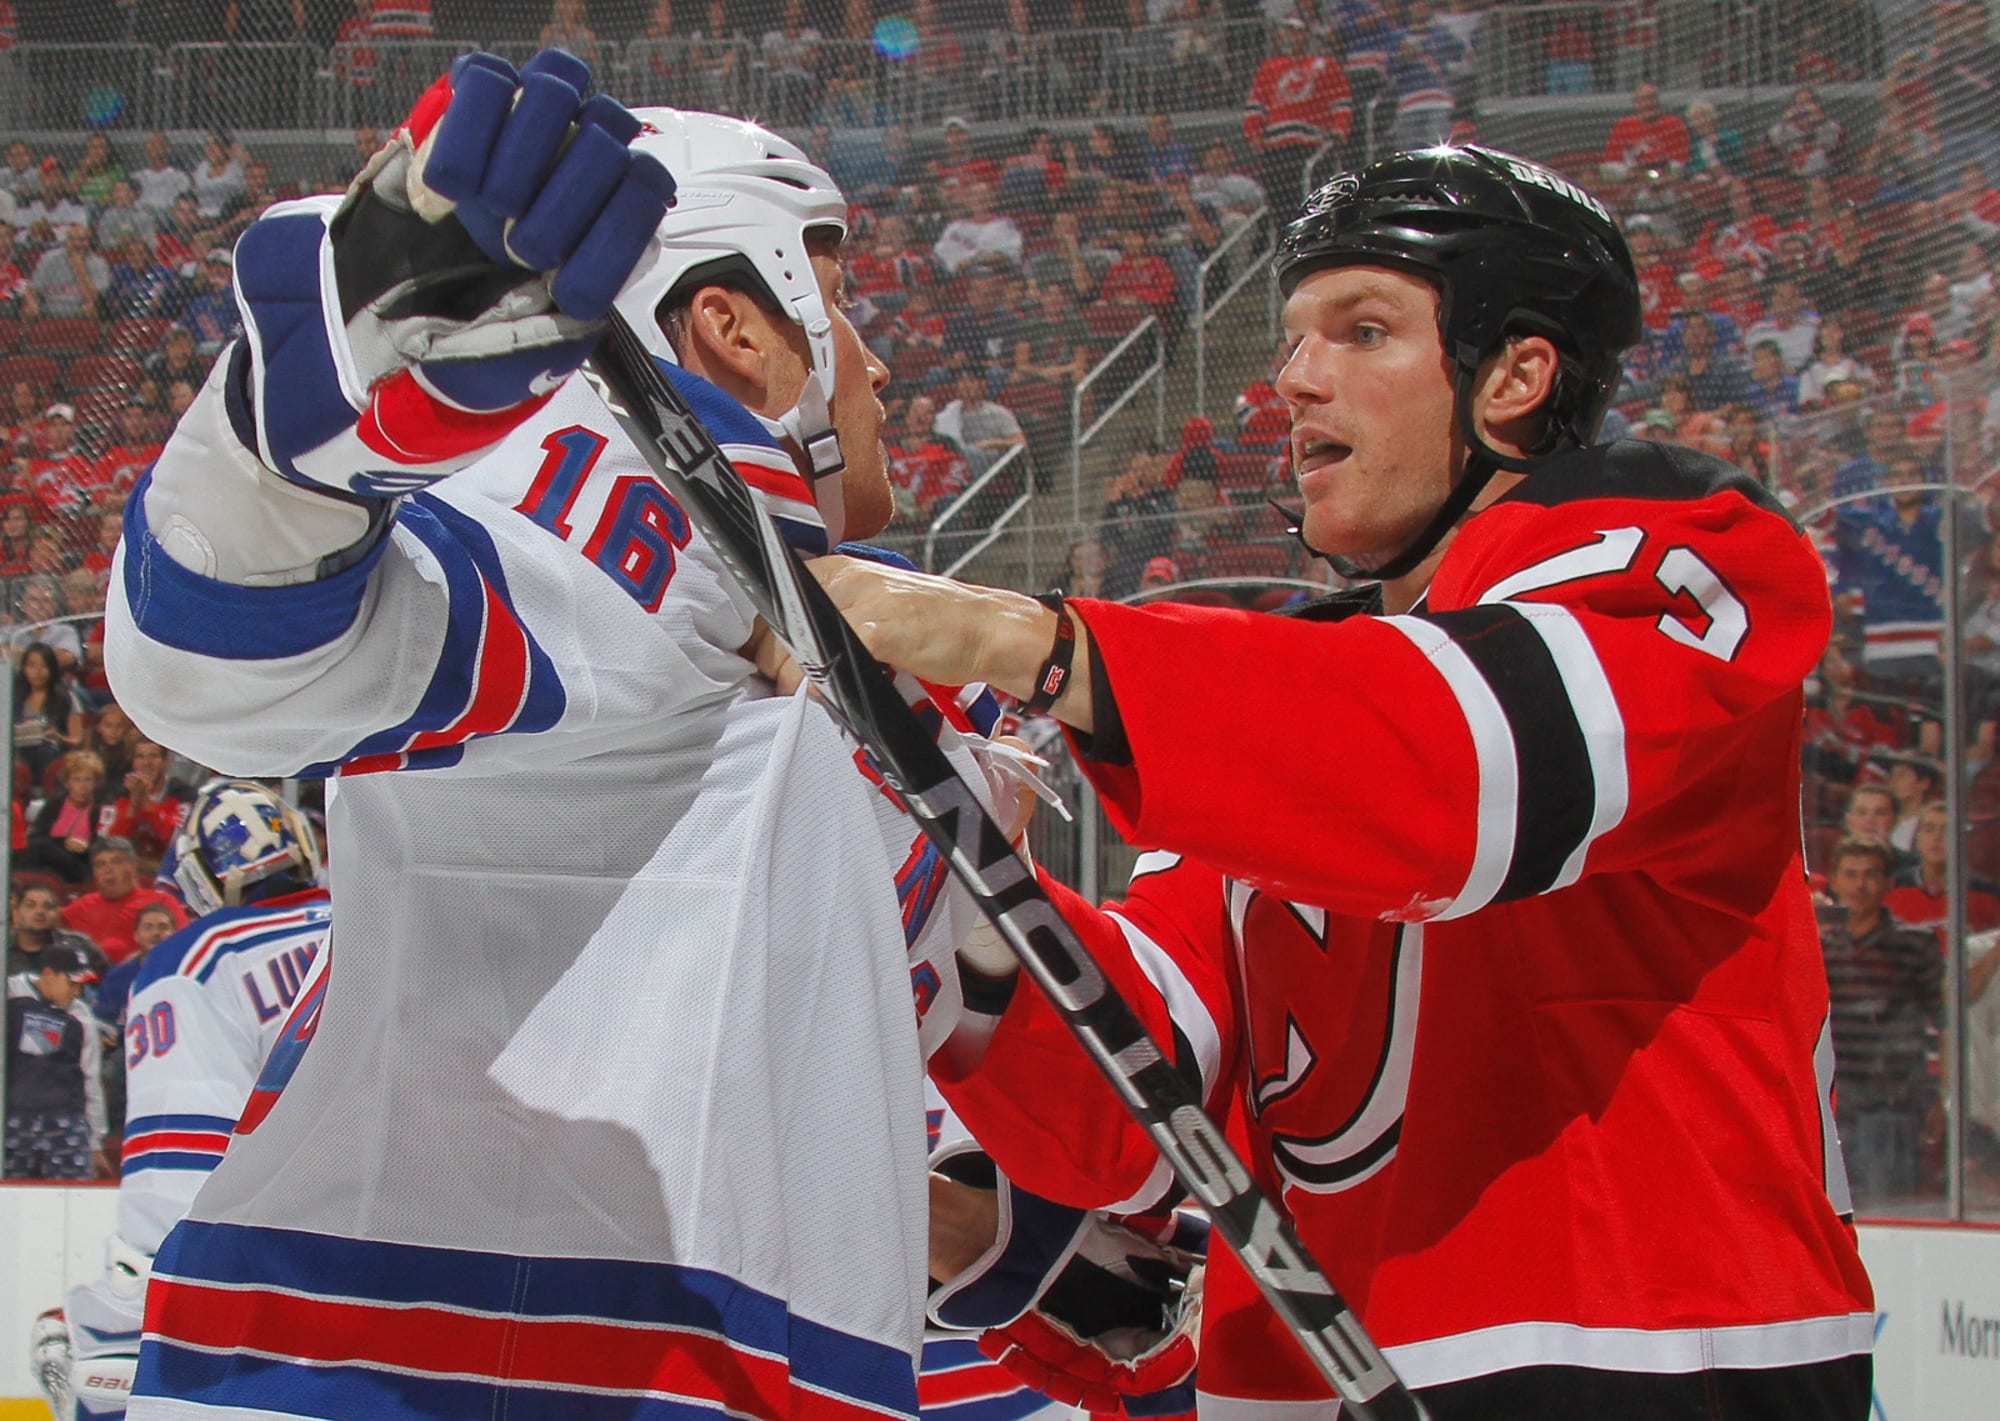 Sean Avery has very little to do with Rangers' solid win - NBC Sports